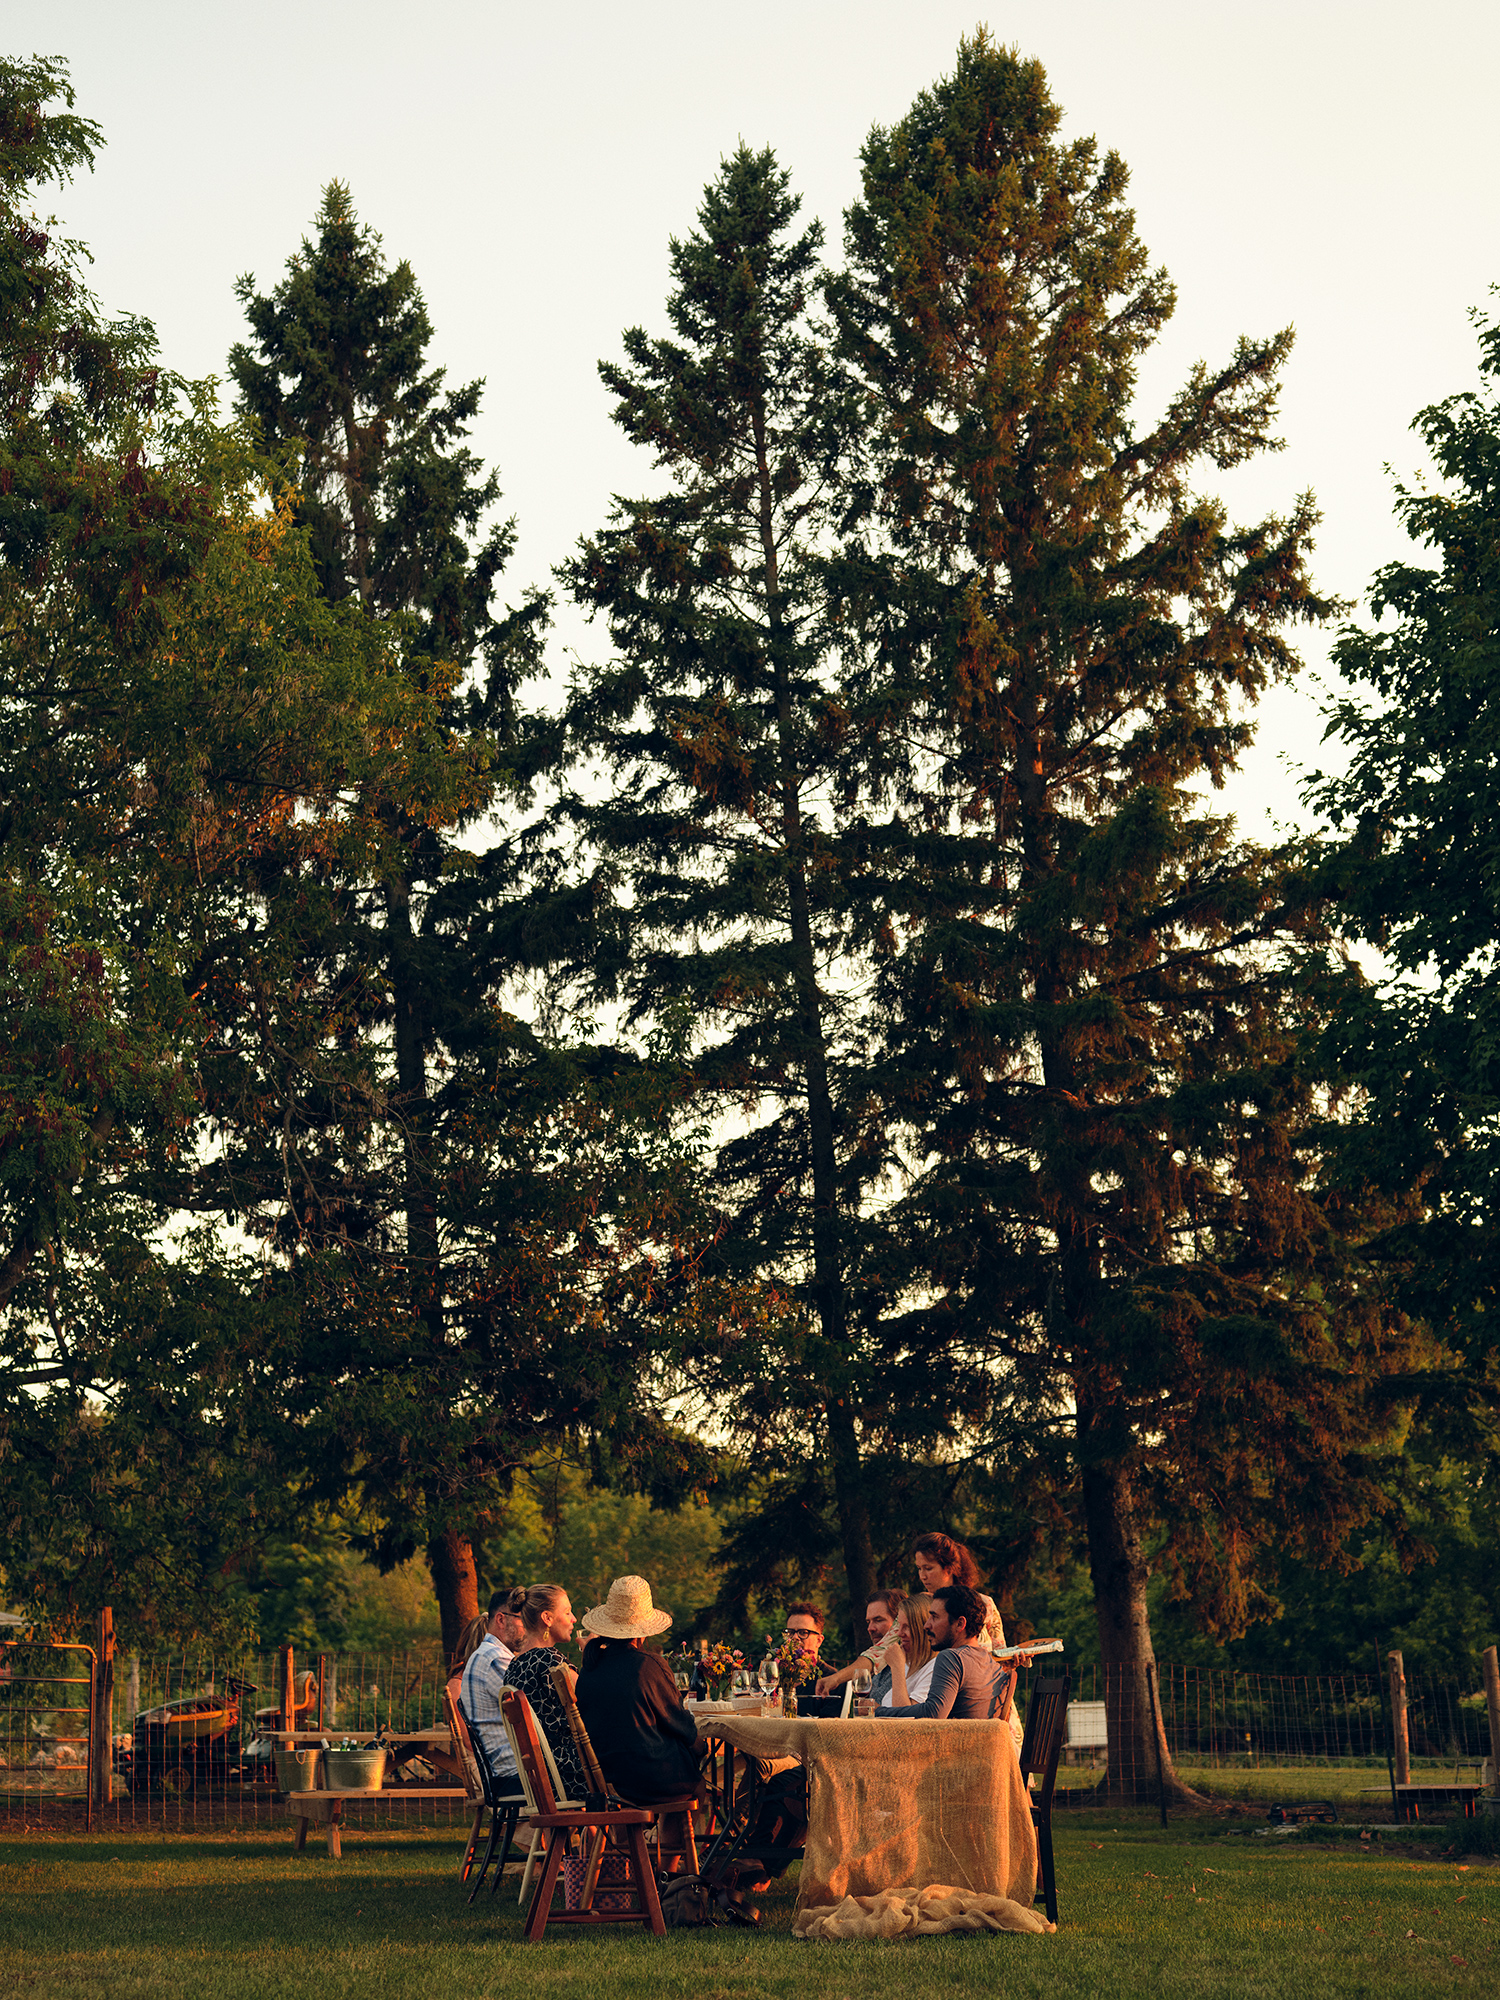 A group dining at a harvest table among evergreens